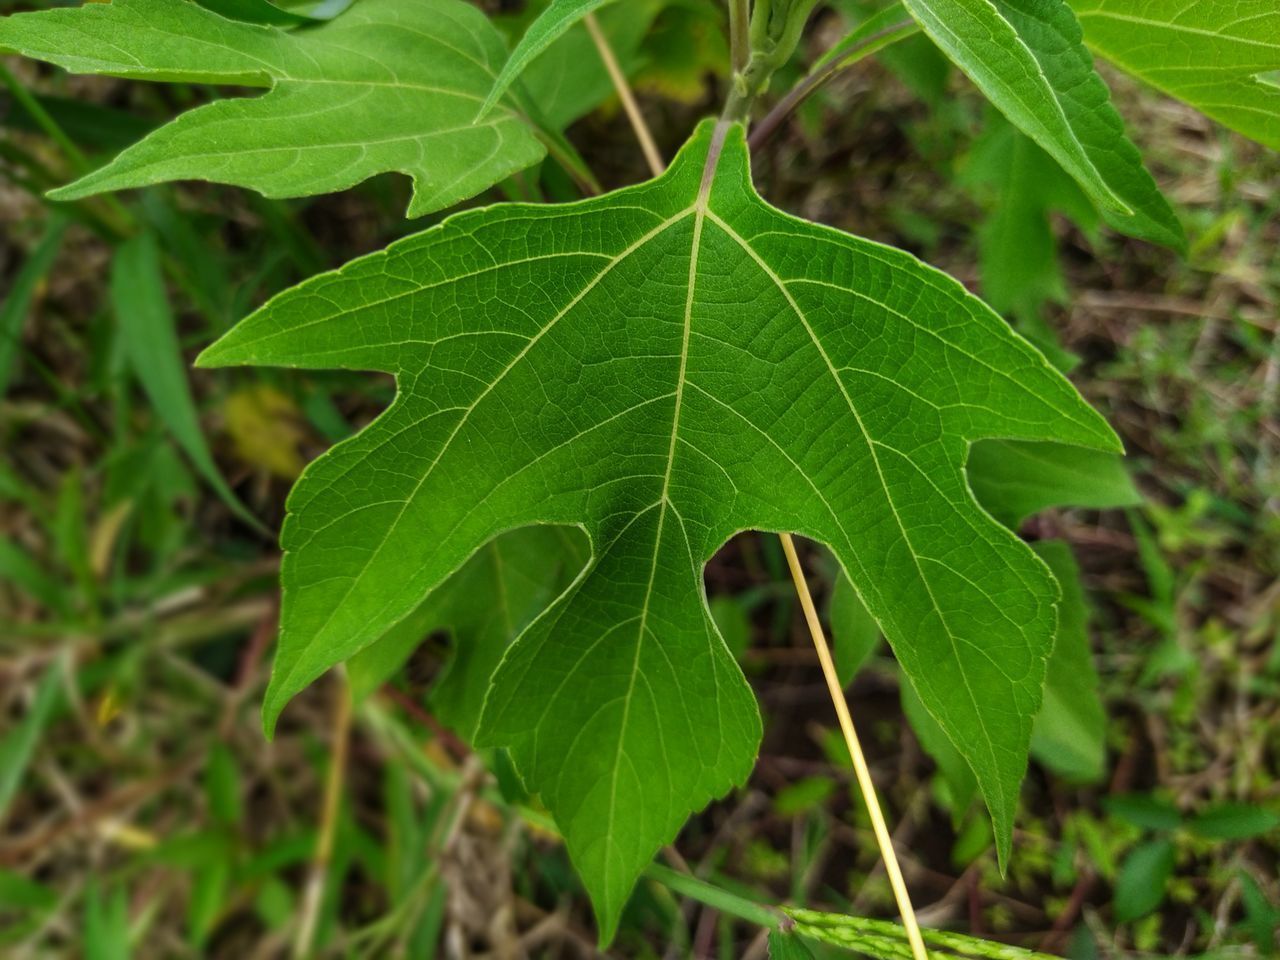 HIGH ANGLE VIEW OF FRESH GREEN LEAF ON LAND